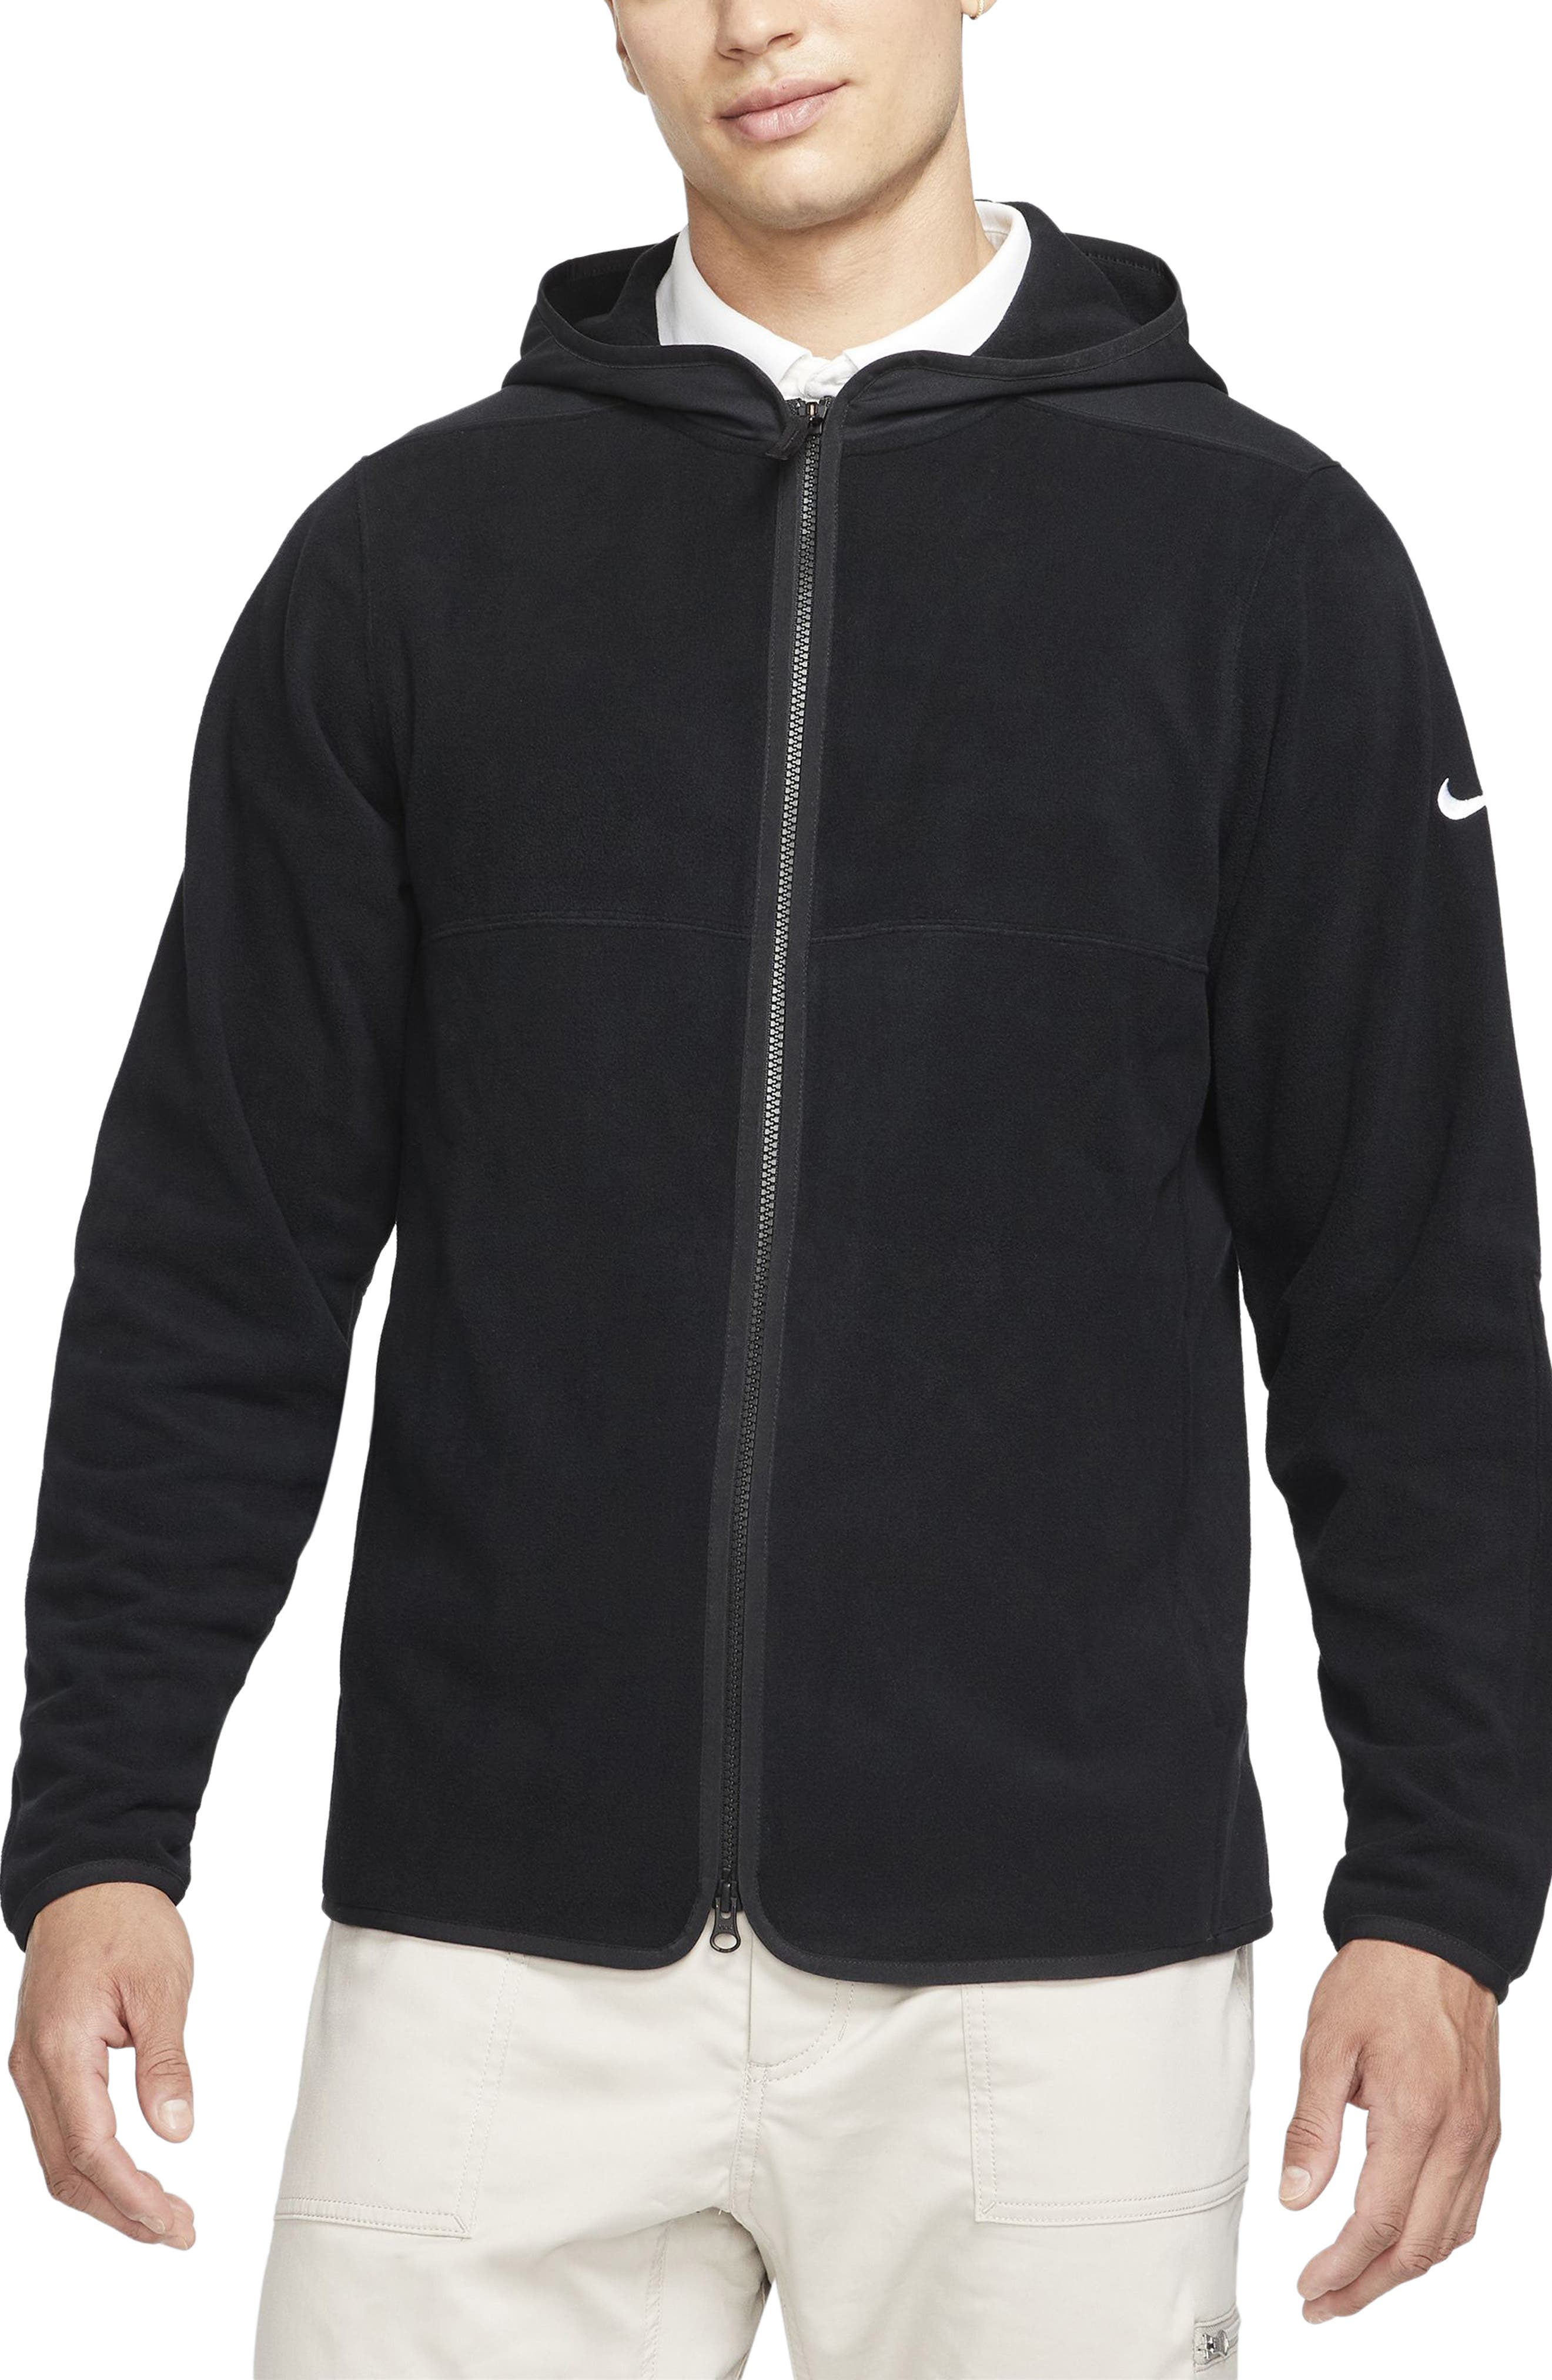 UPC 195240001266 product image for Nike Golf Nike Therma-FIT Victory Zip Golf Hoodie in Black/Black/Black/White at  | upcitemdb.com